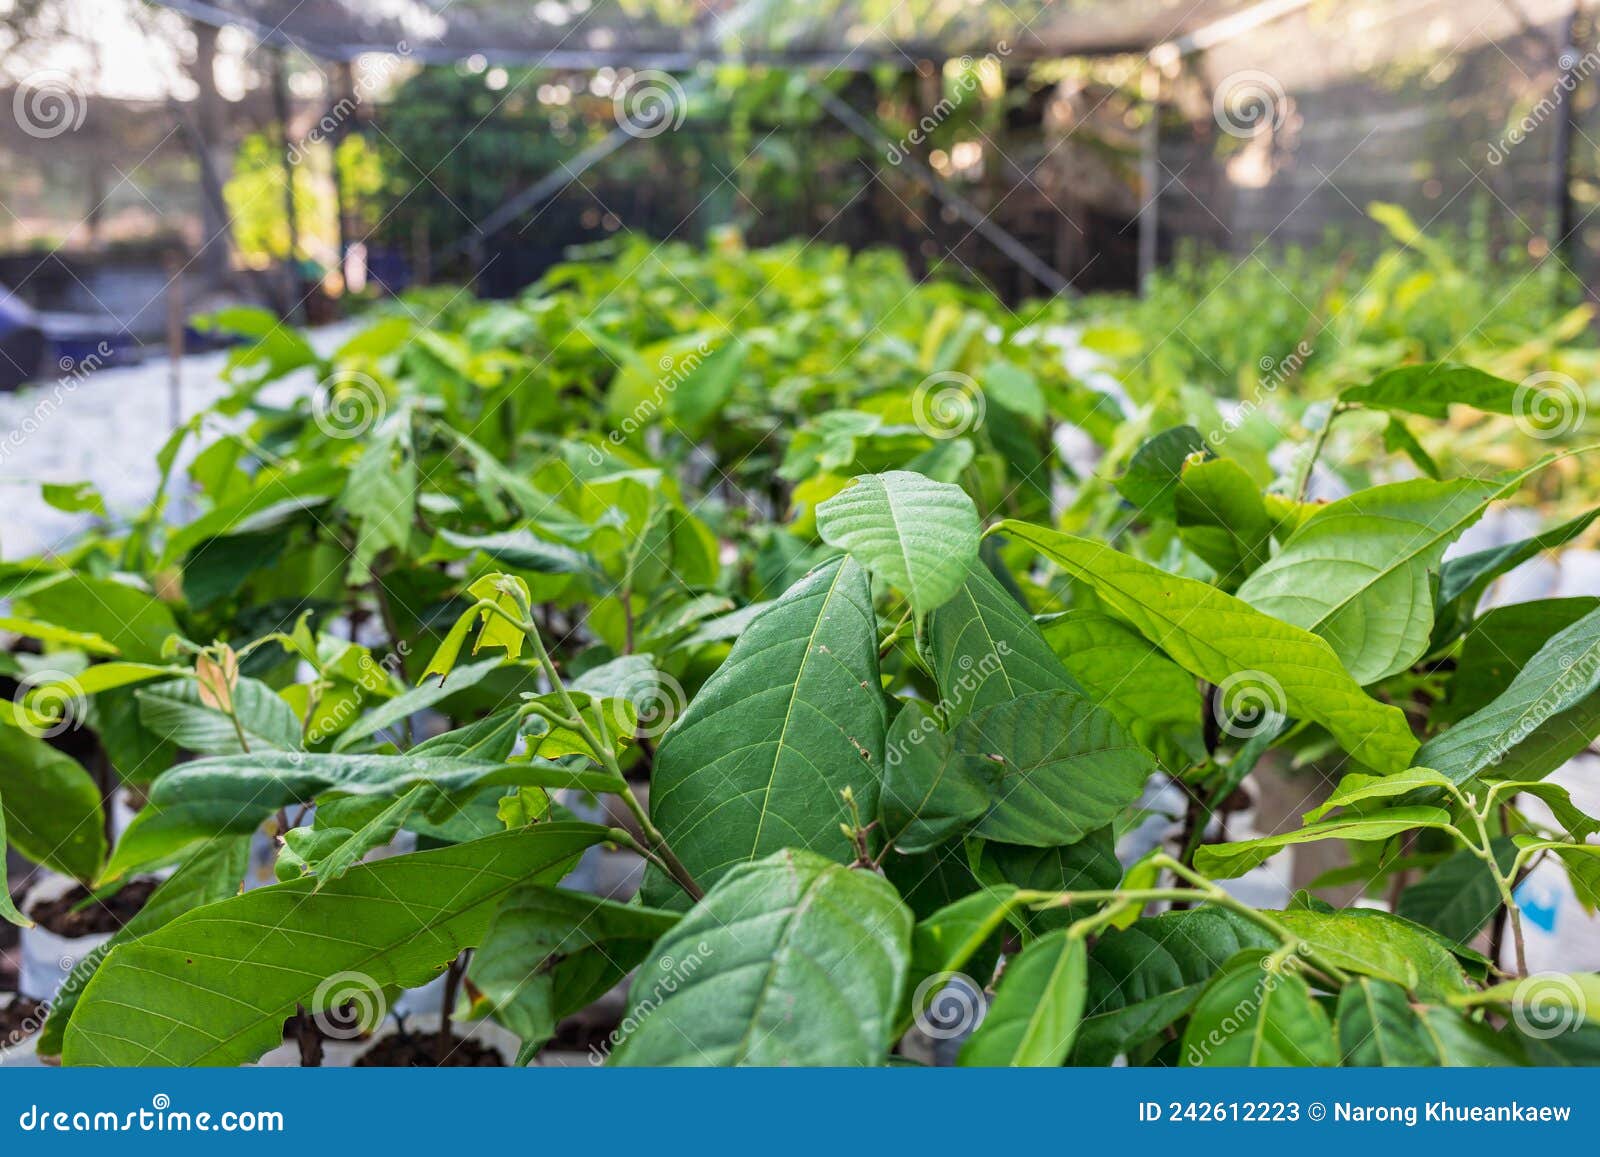 cocoa seedlings growing on the farm